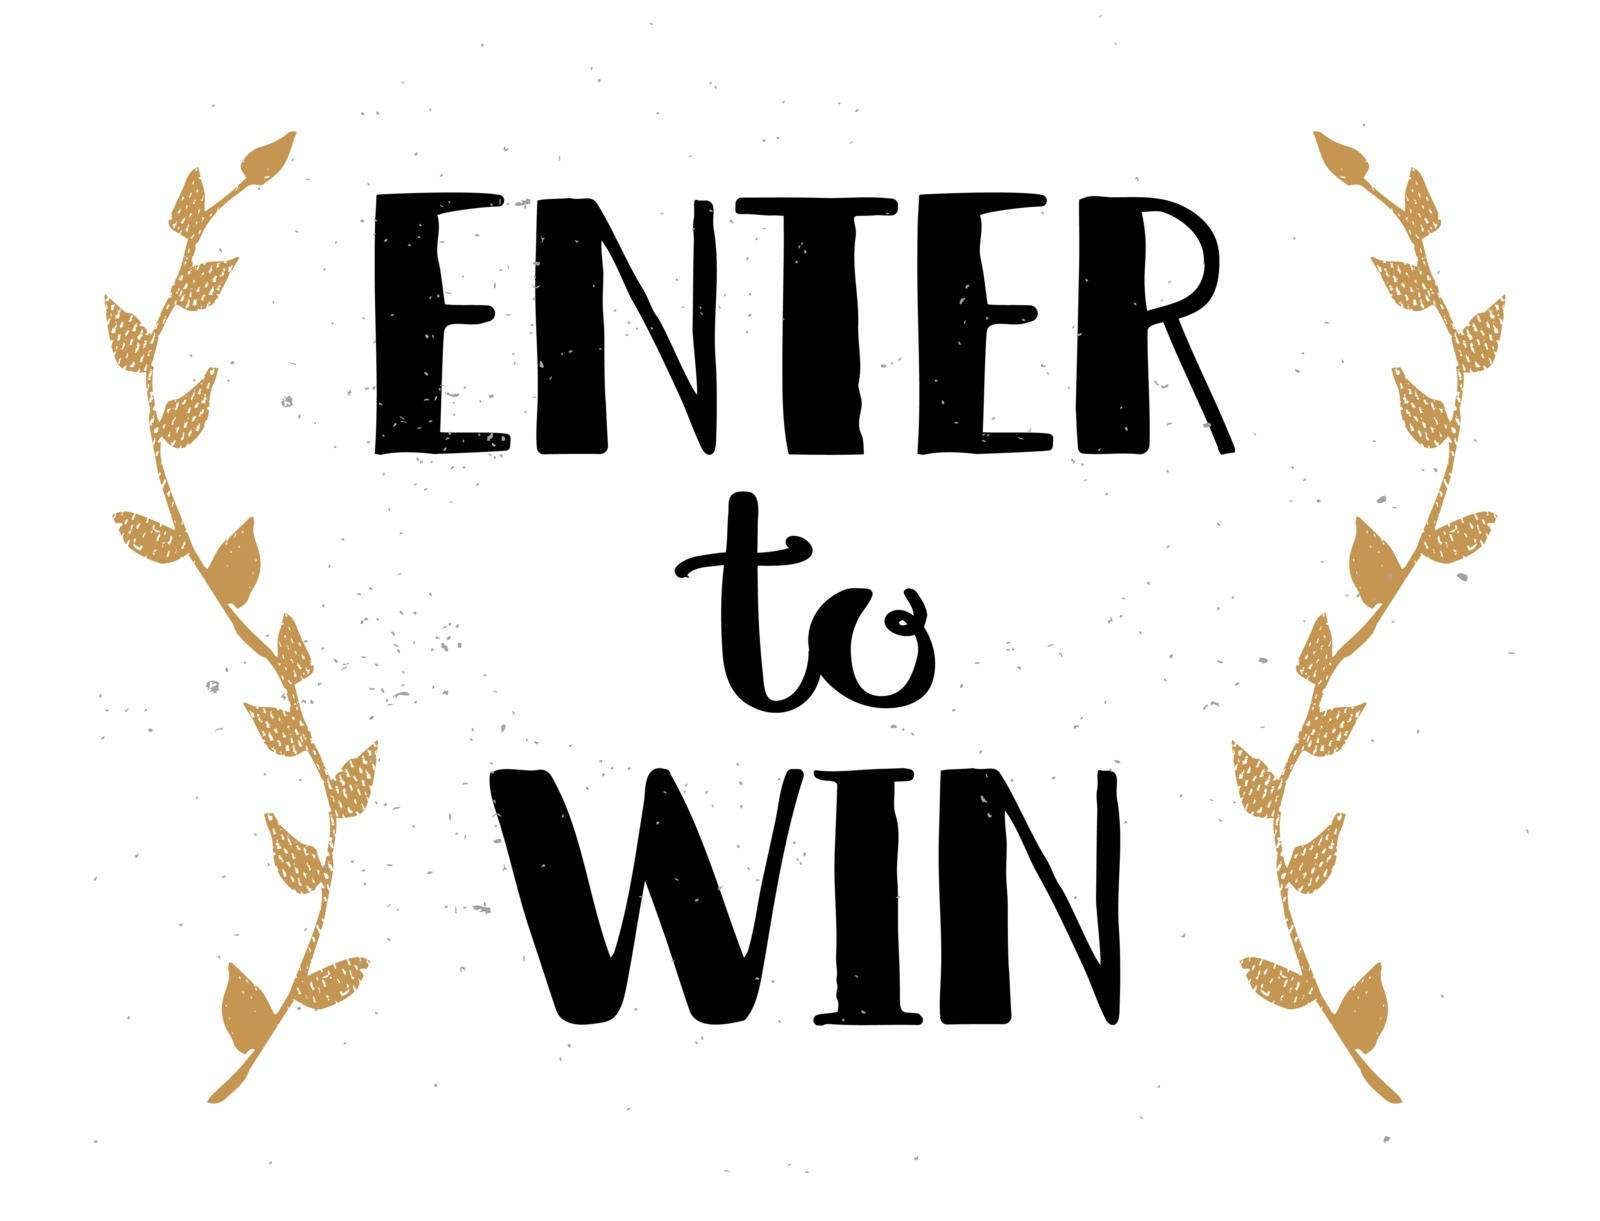 Enter to Win Vector Sign, Win Prize, Win in Lottery  by ckybes